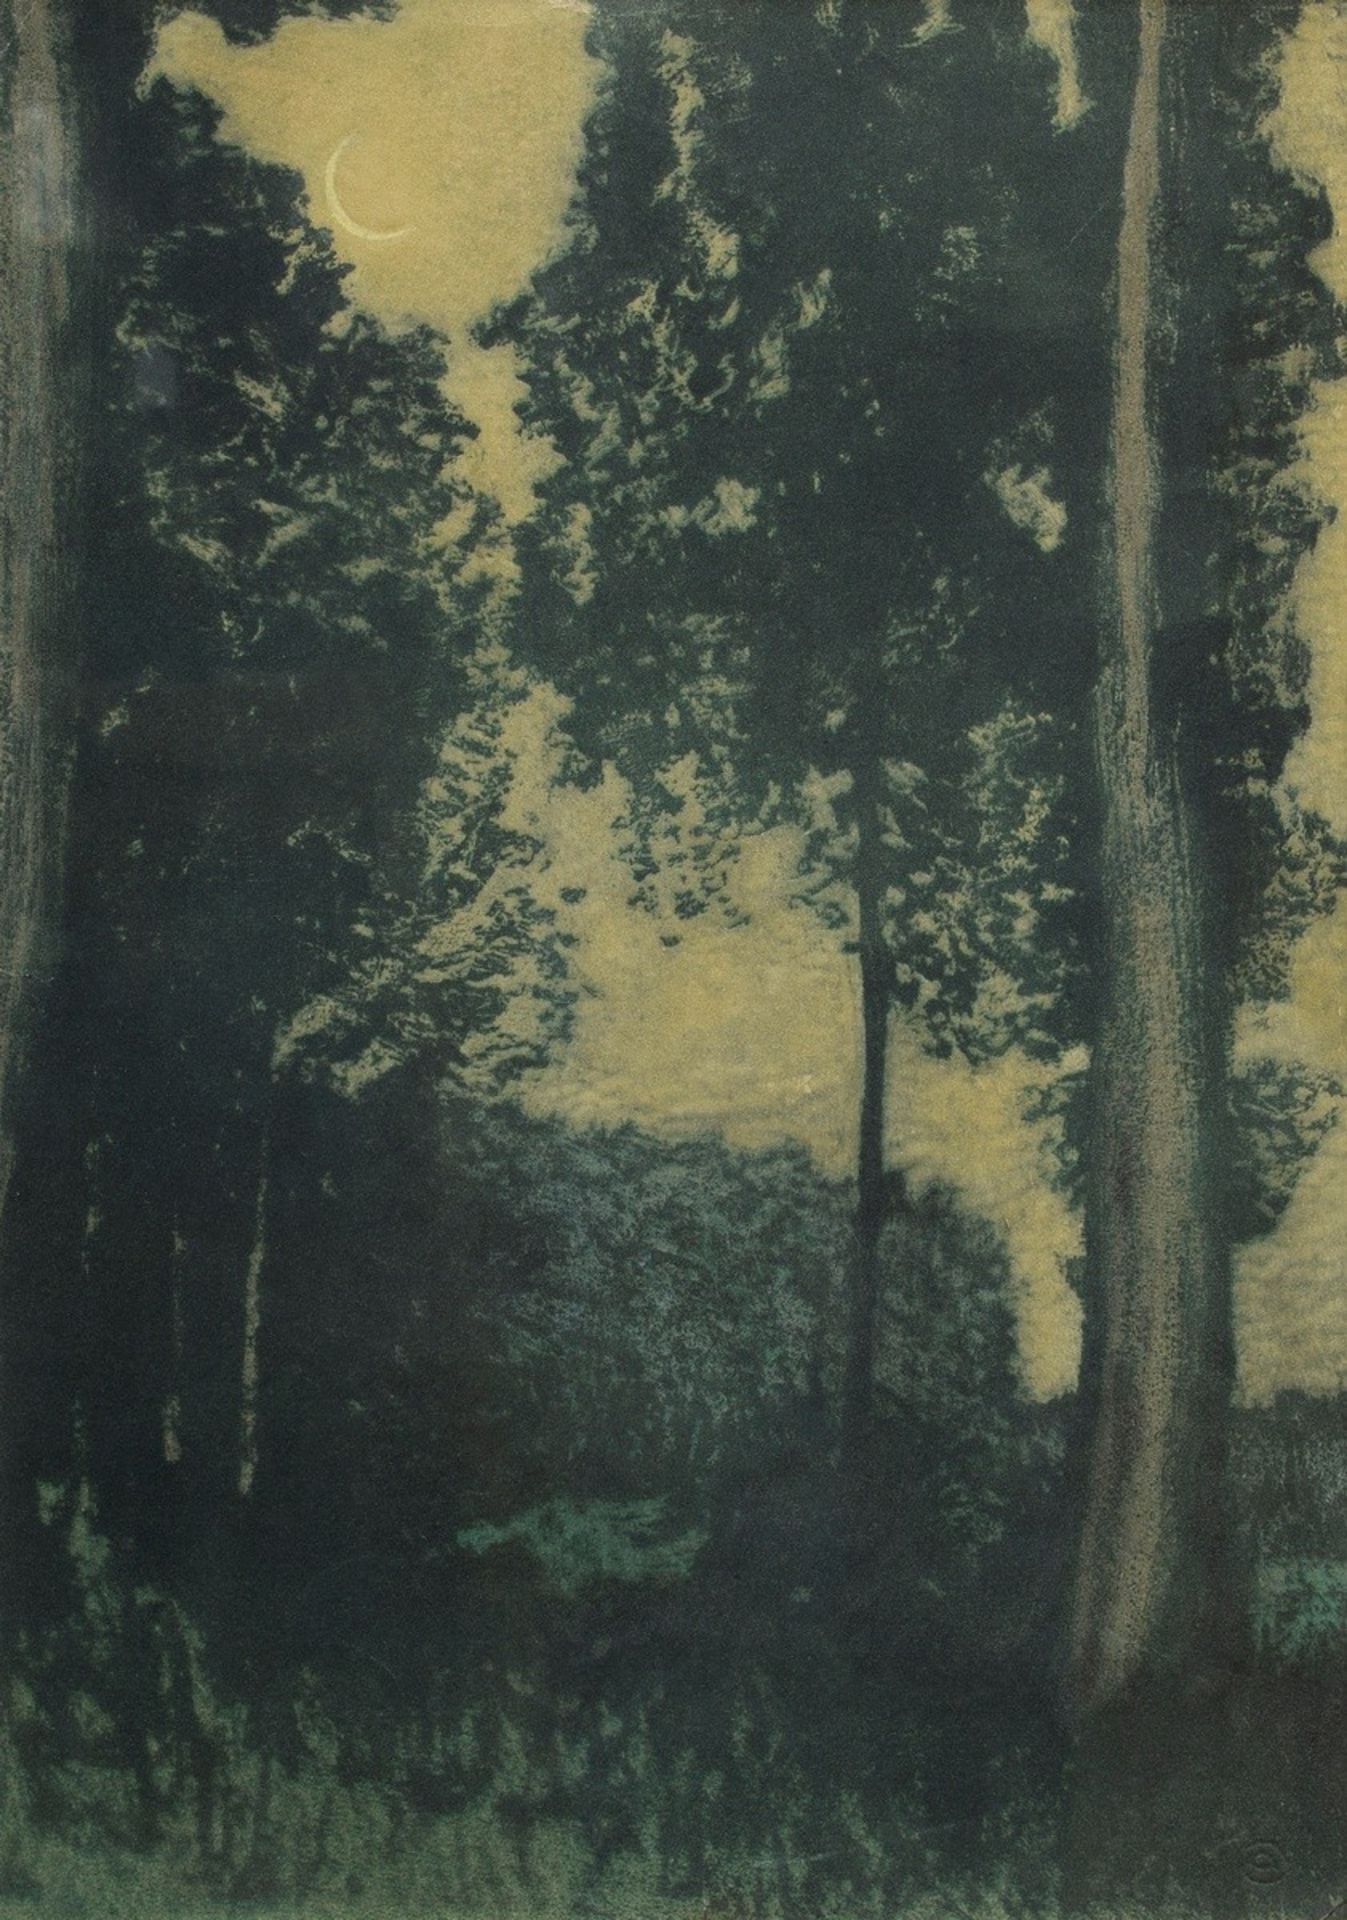 Illies, Arthur (1870-1952) "Crescent Moon in the Forest", etching/etching green/yellowish, narrow g